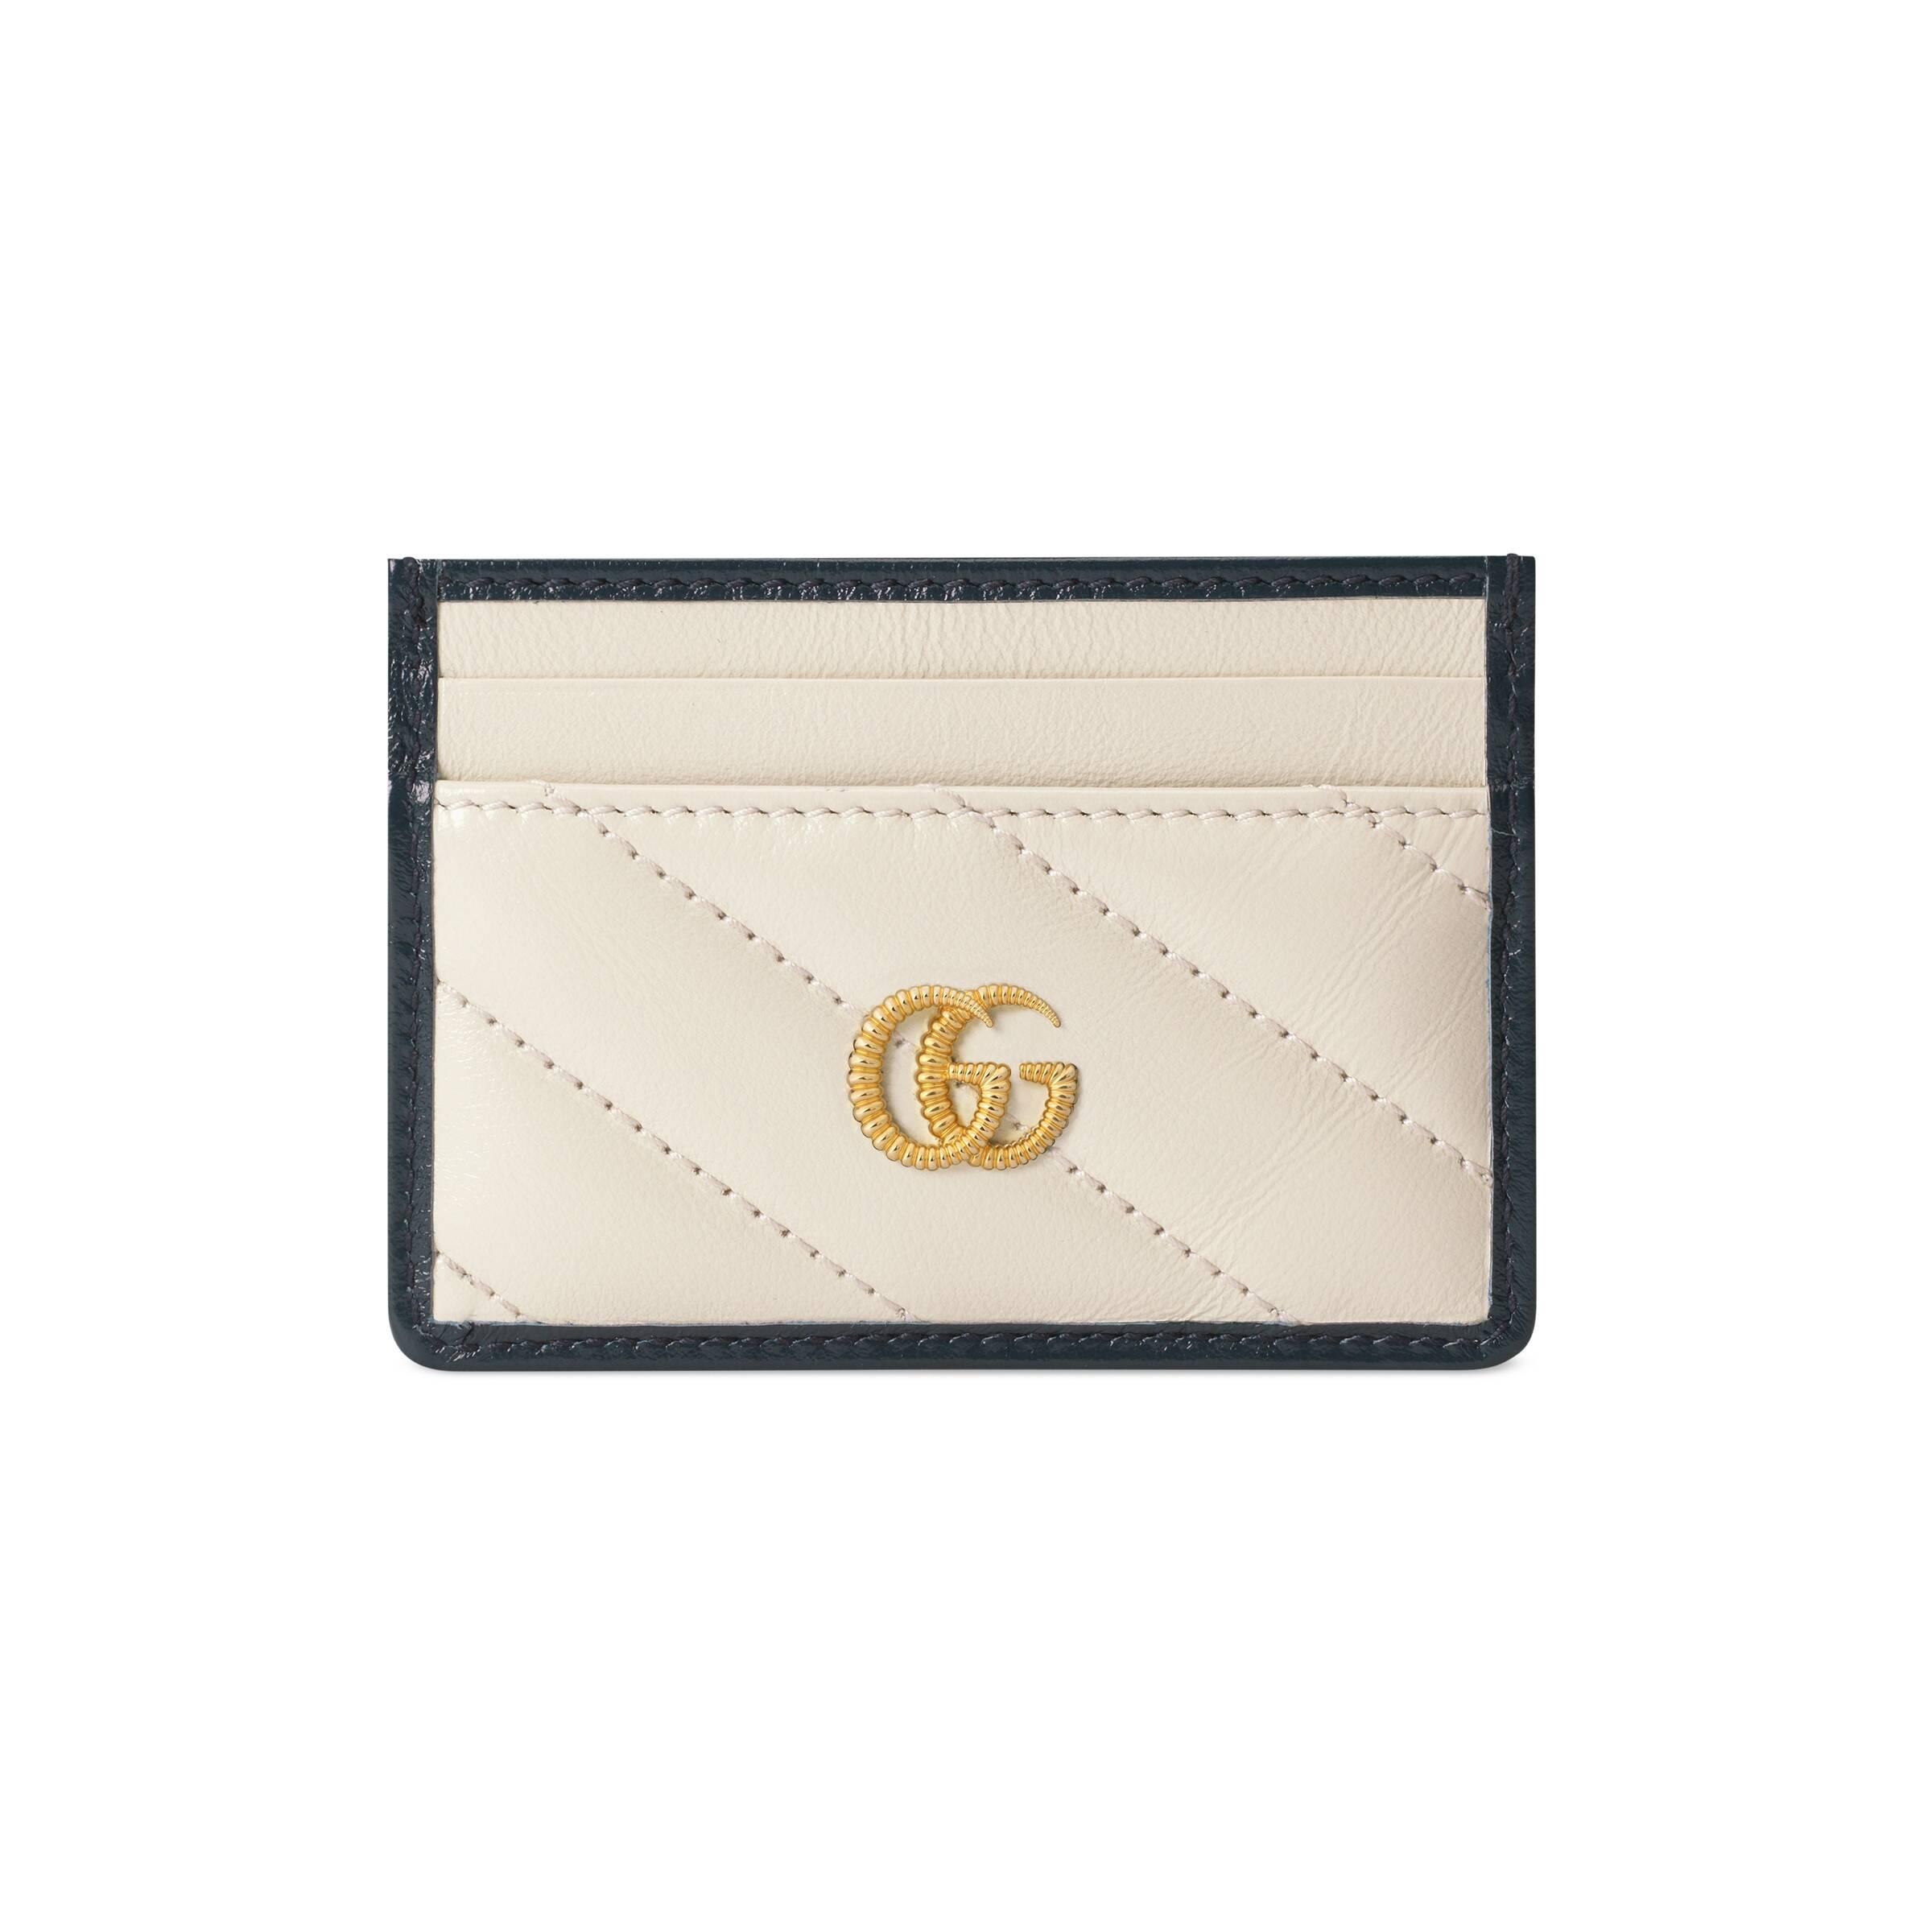 GUCCI Card holder with GG